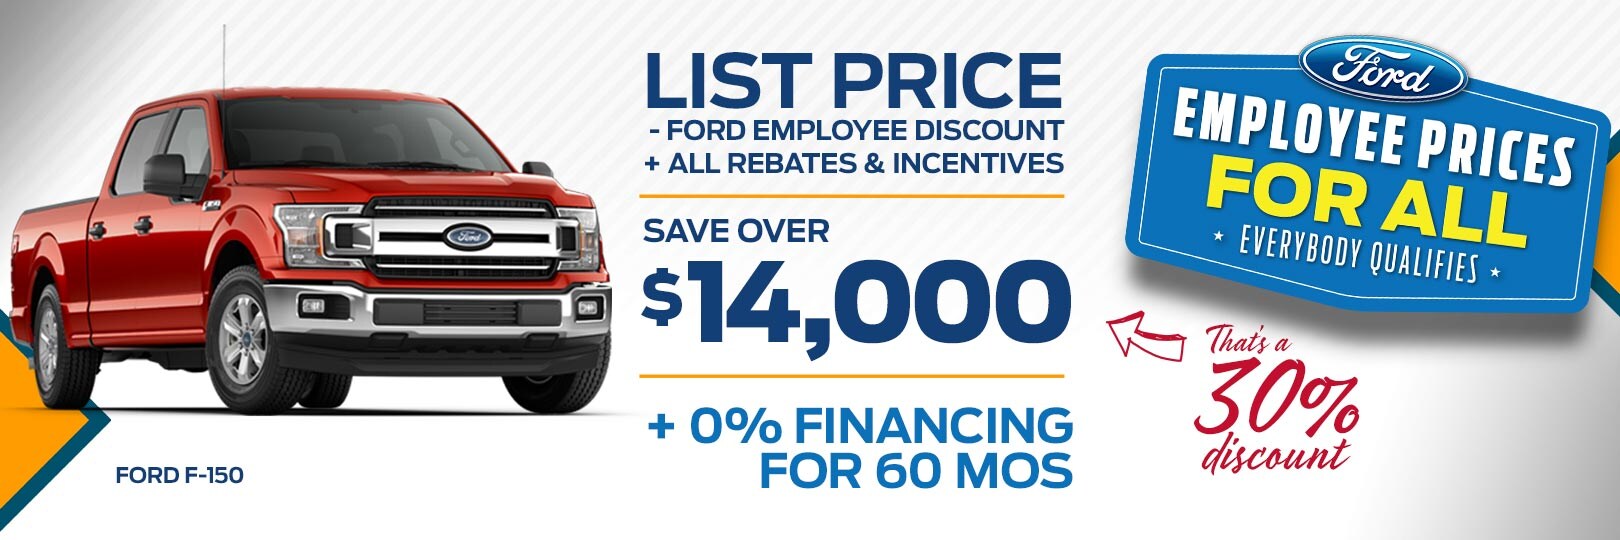 New & Used Ford Dealership in Fort Wayne, IN